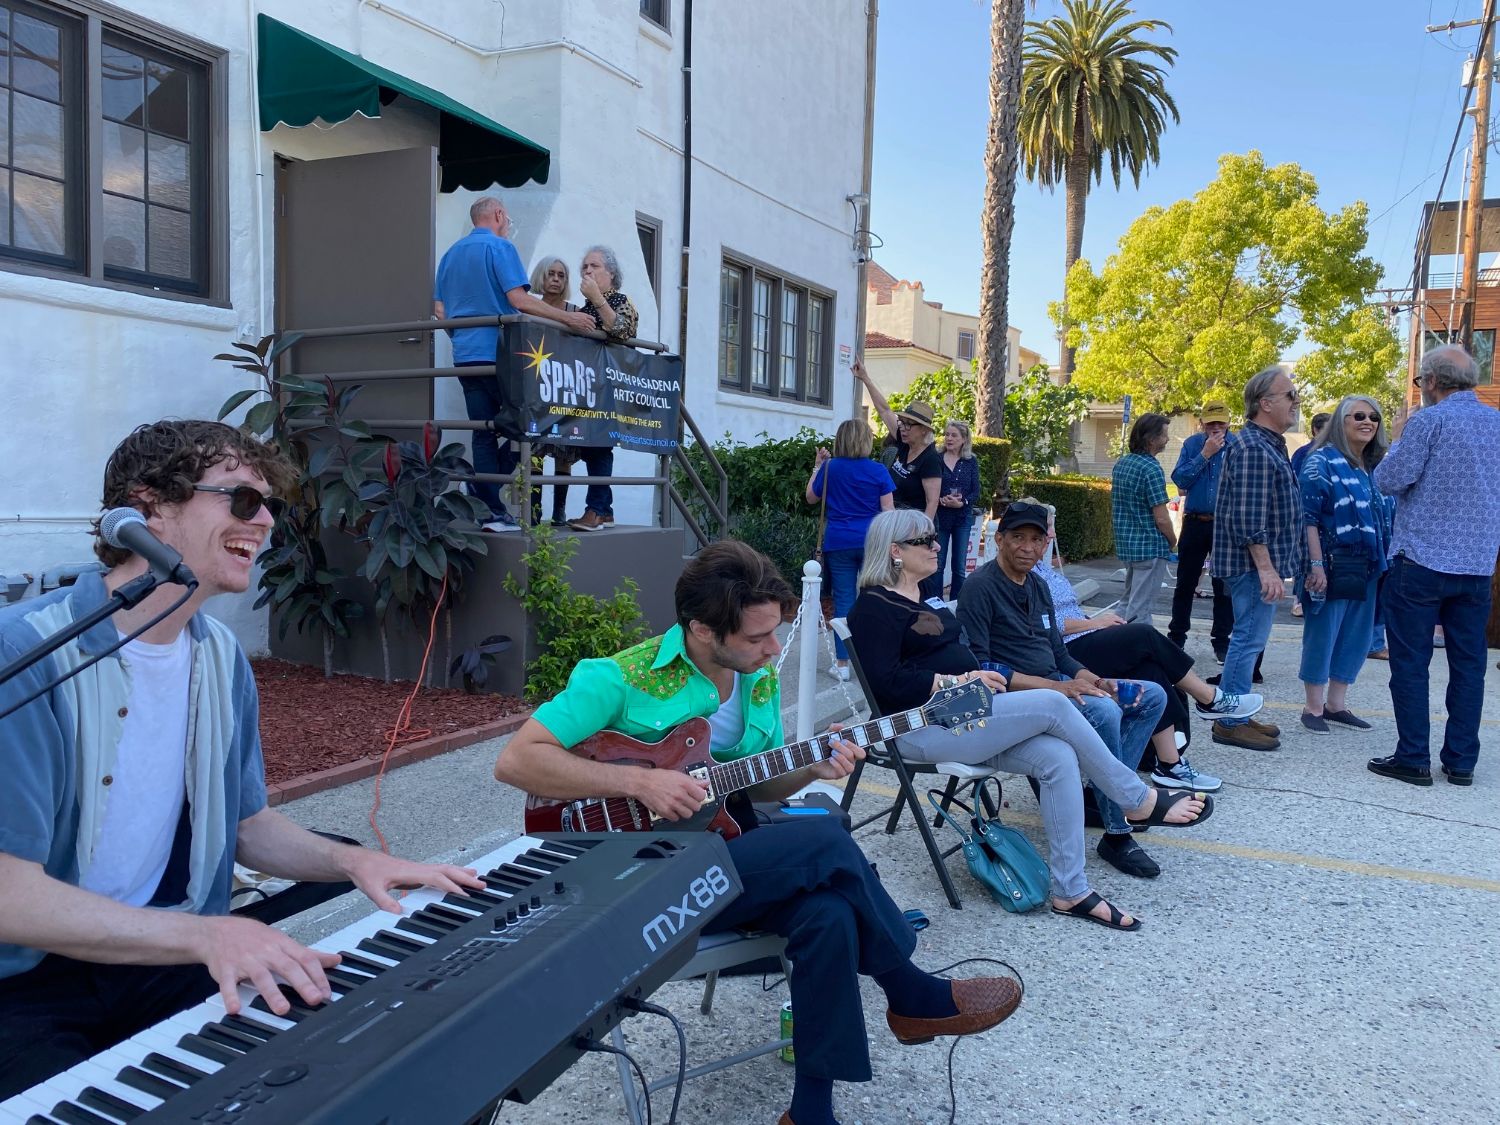 PHOTO: Alisa Hayashida | The South Pasadenan | Live music and refreshments were offered at SPARC's new gallery located at 1000 Fremont Avenue in South Pasadena.